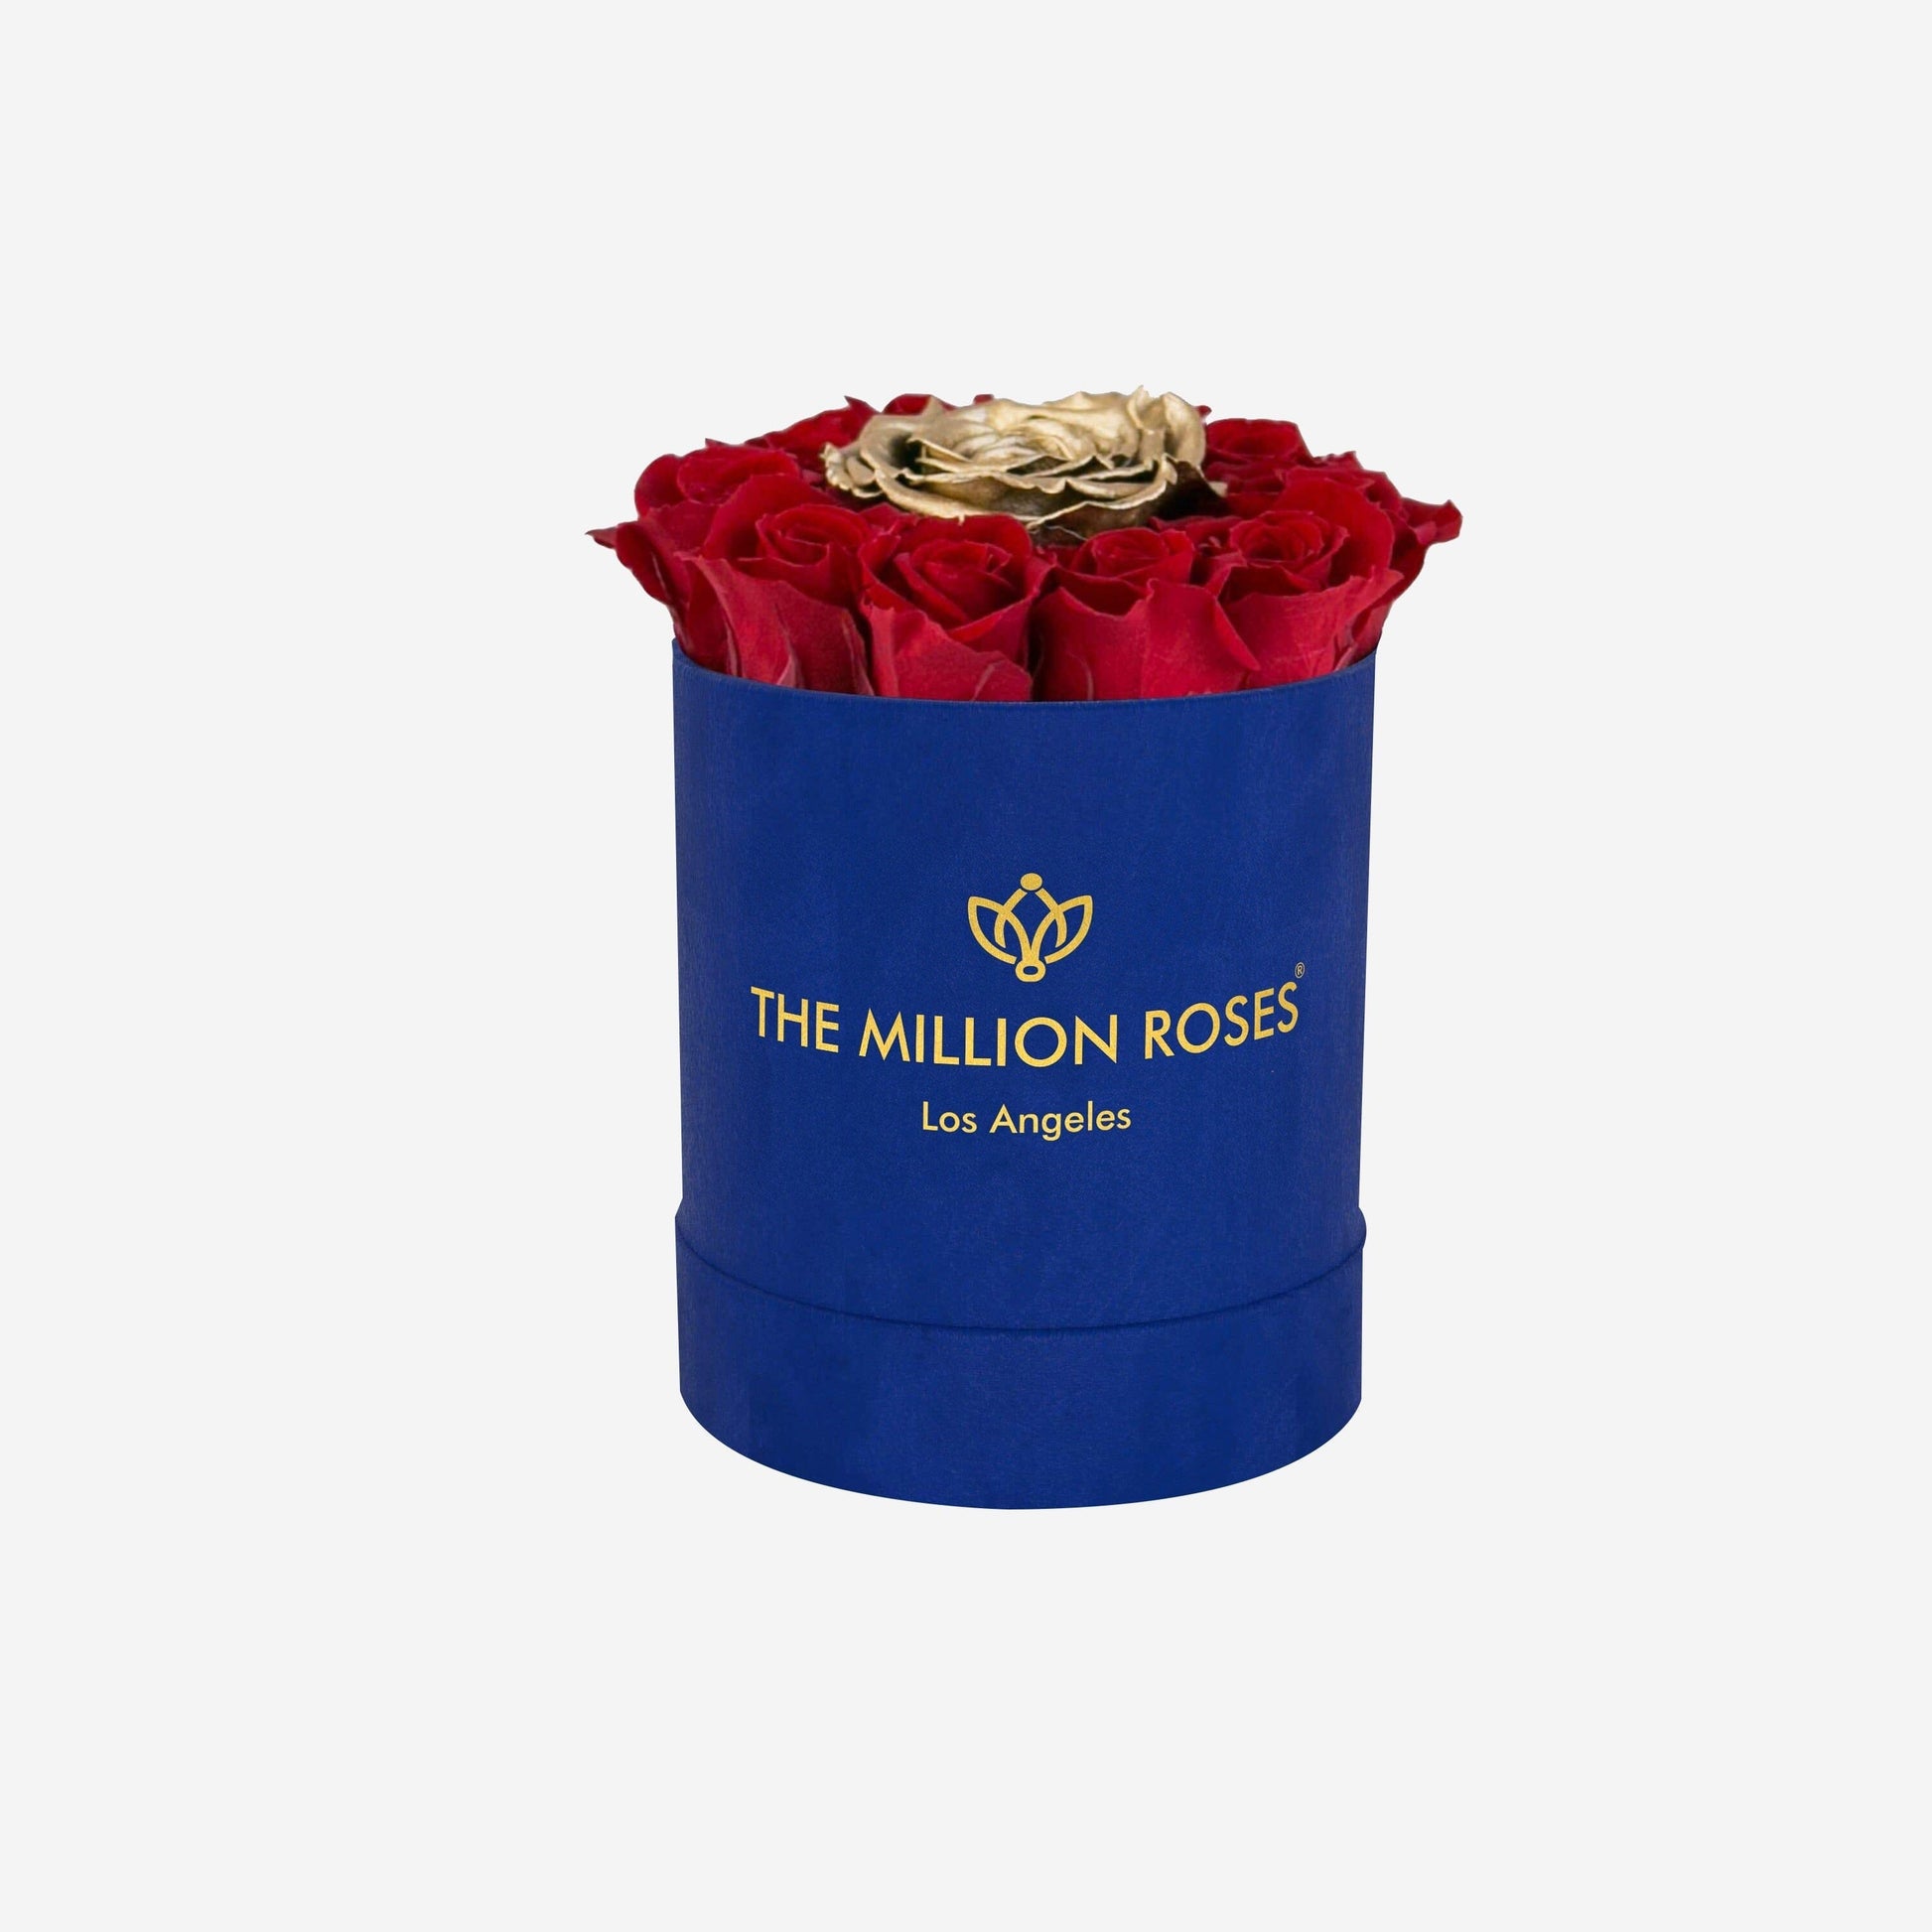 Basic Royal Blue Suede Box | Red & Gold Mini Roses - The Million Roses